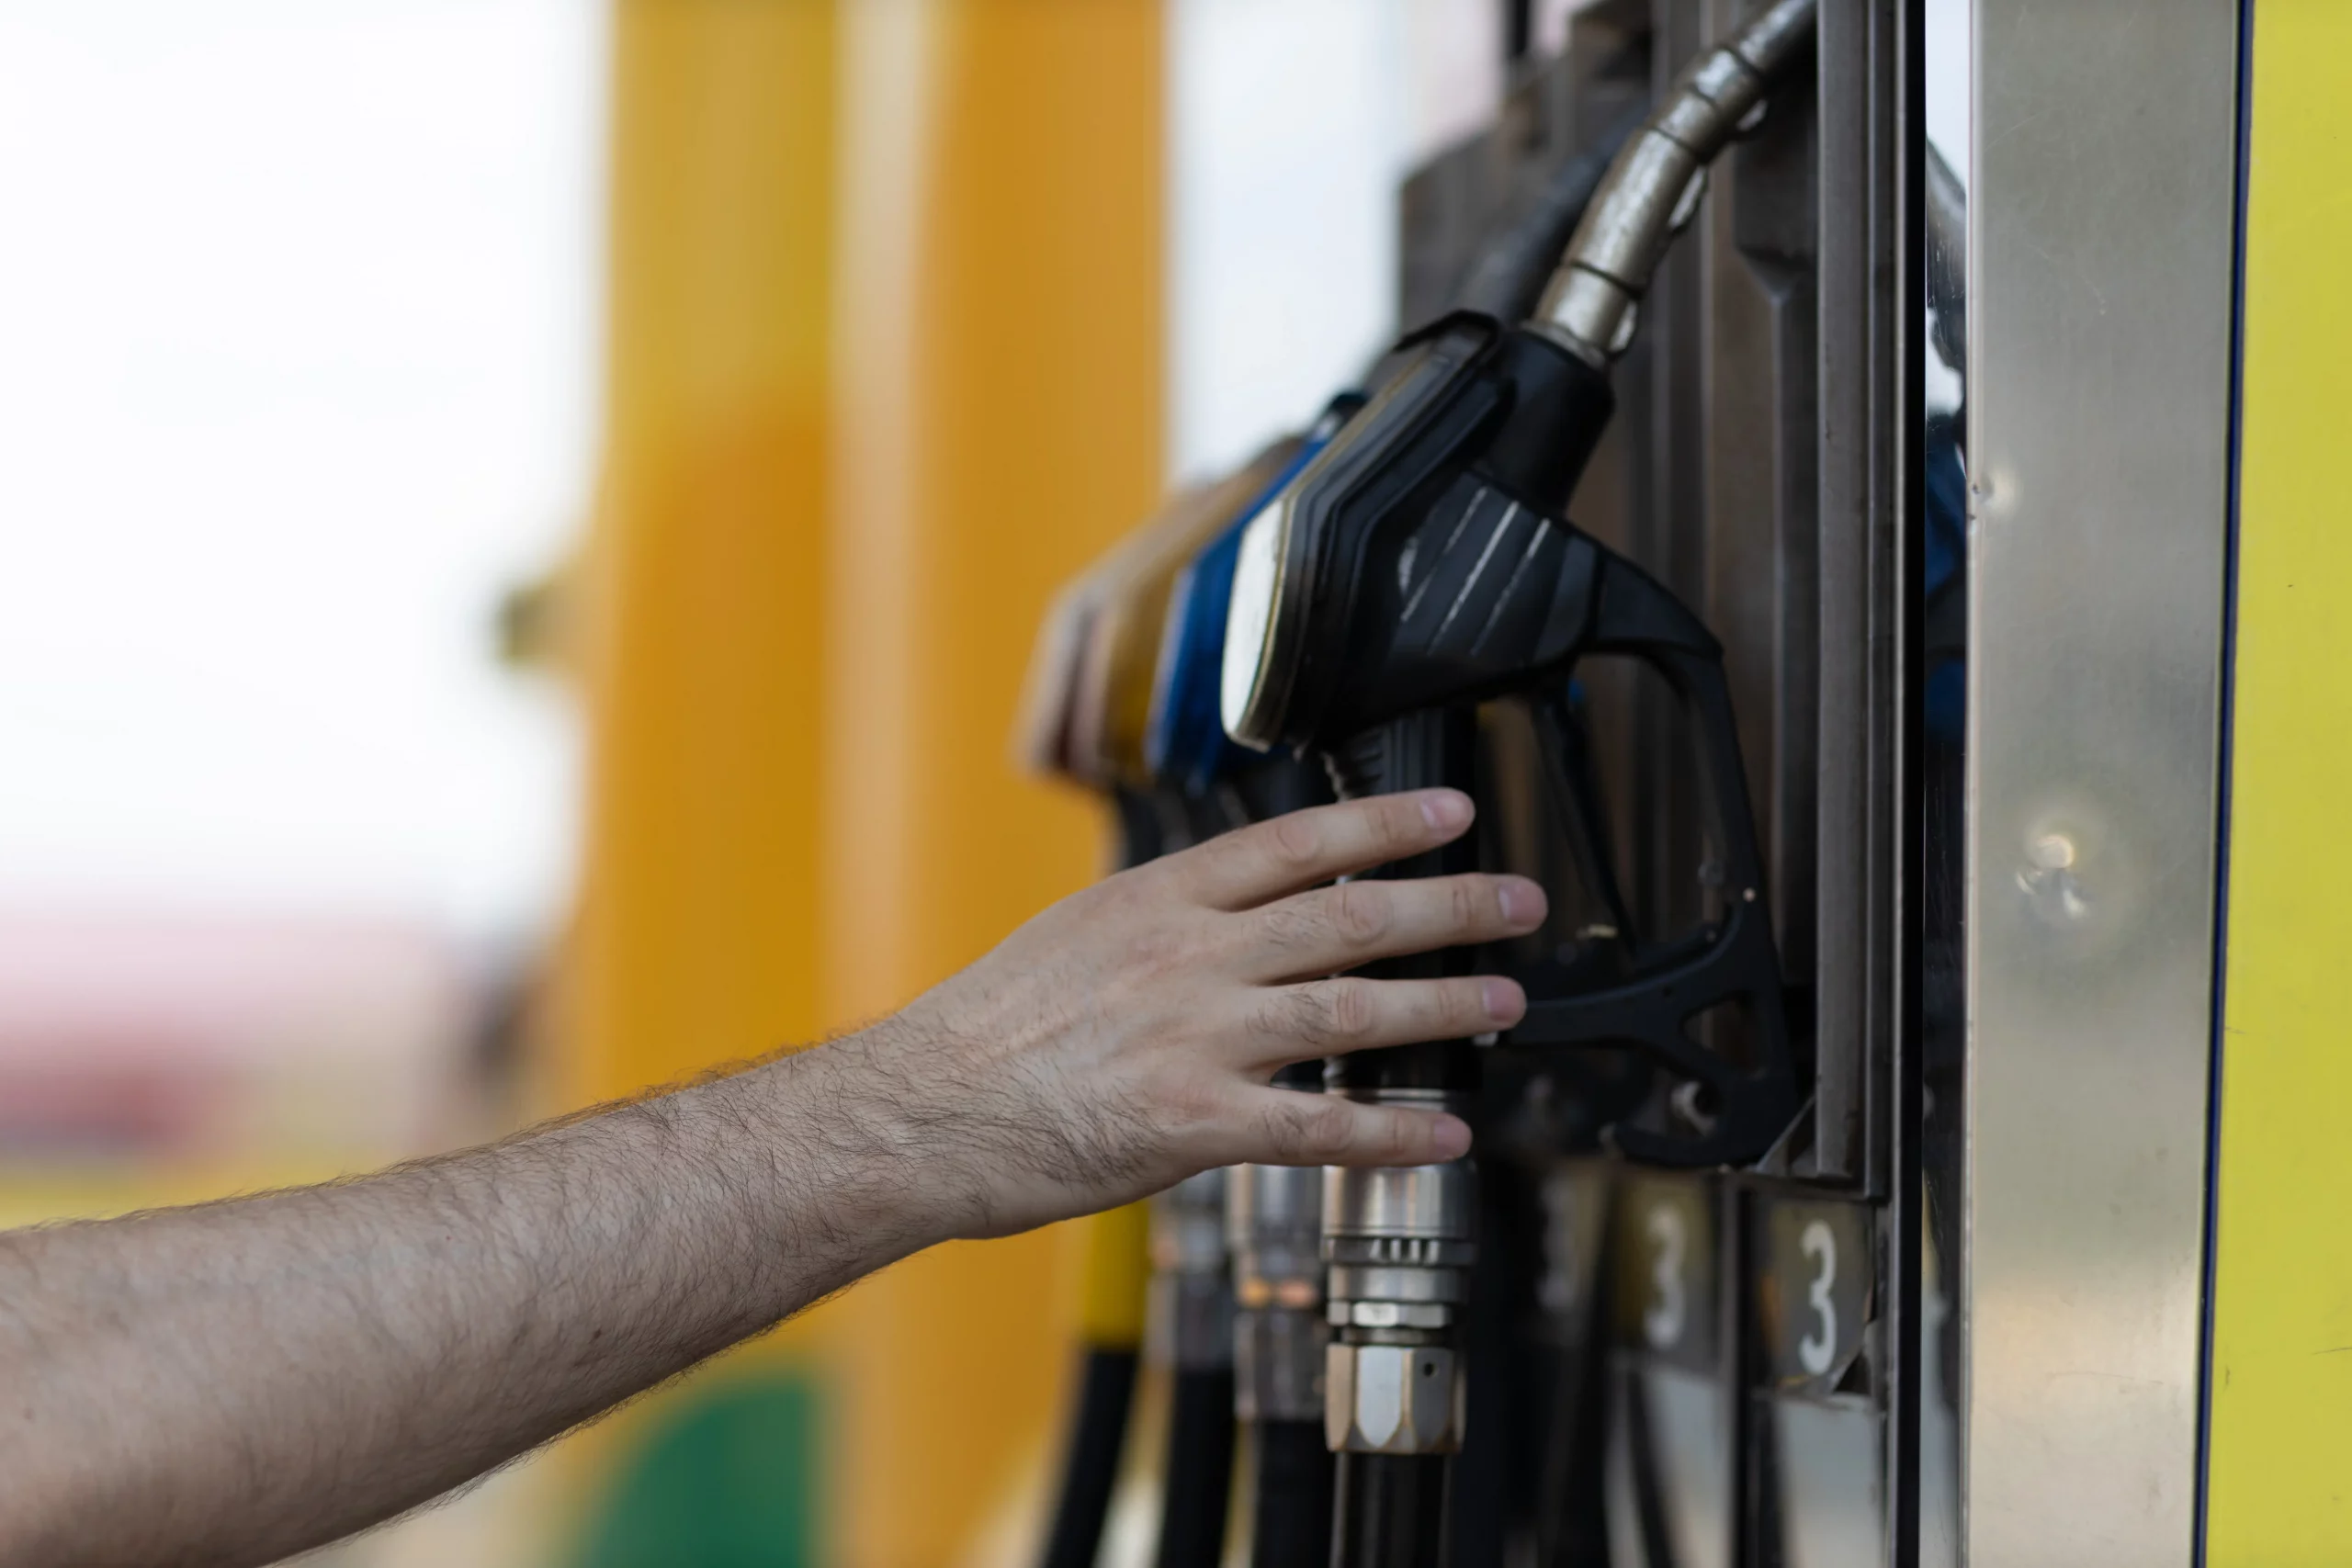 Close-up of a person's hand holding a black fuel pump at a gas station, symbolizing the use of flex fuel options in modern transportation.